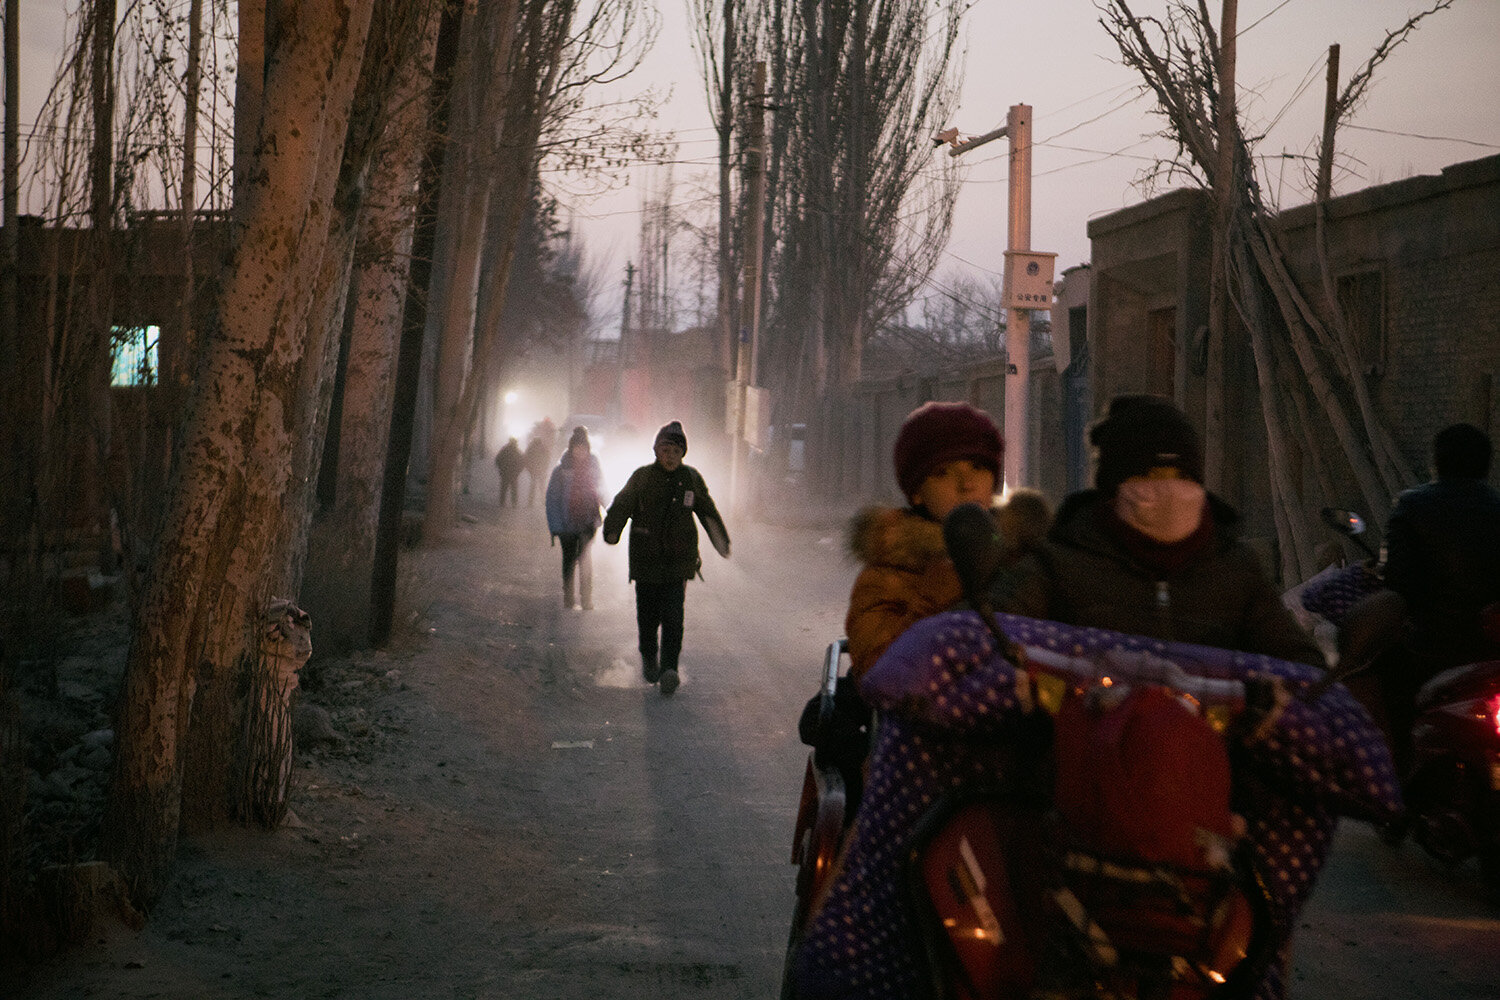  Pictures taken in Xinjiang on assignment for  The New York Times ,  The Wall Street Journal  and  The Telegraph , in 2017 and 2019.    